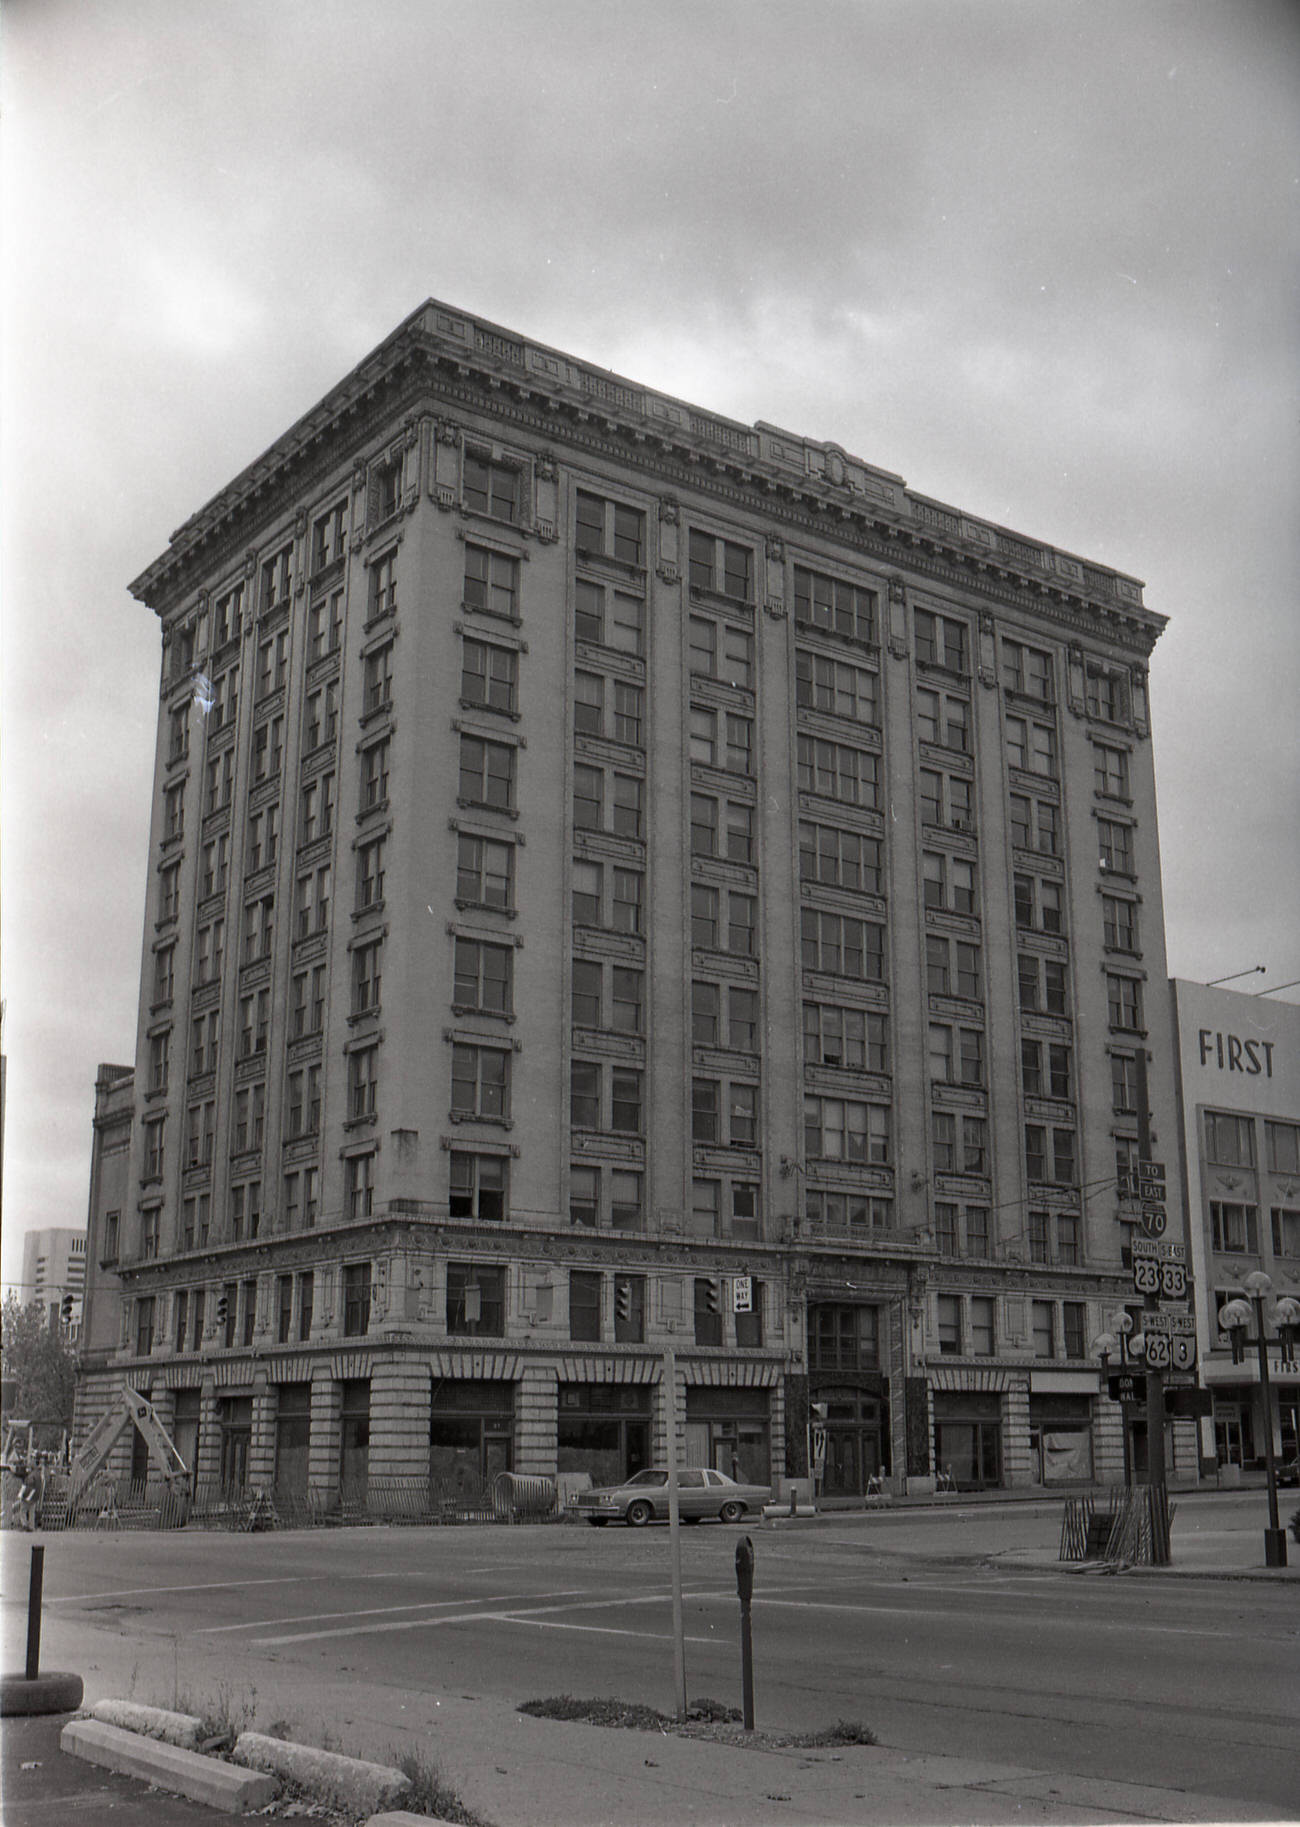 Hartman Building, part of the Hartman family's holdings including farm and theater, 1980.